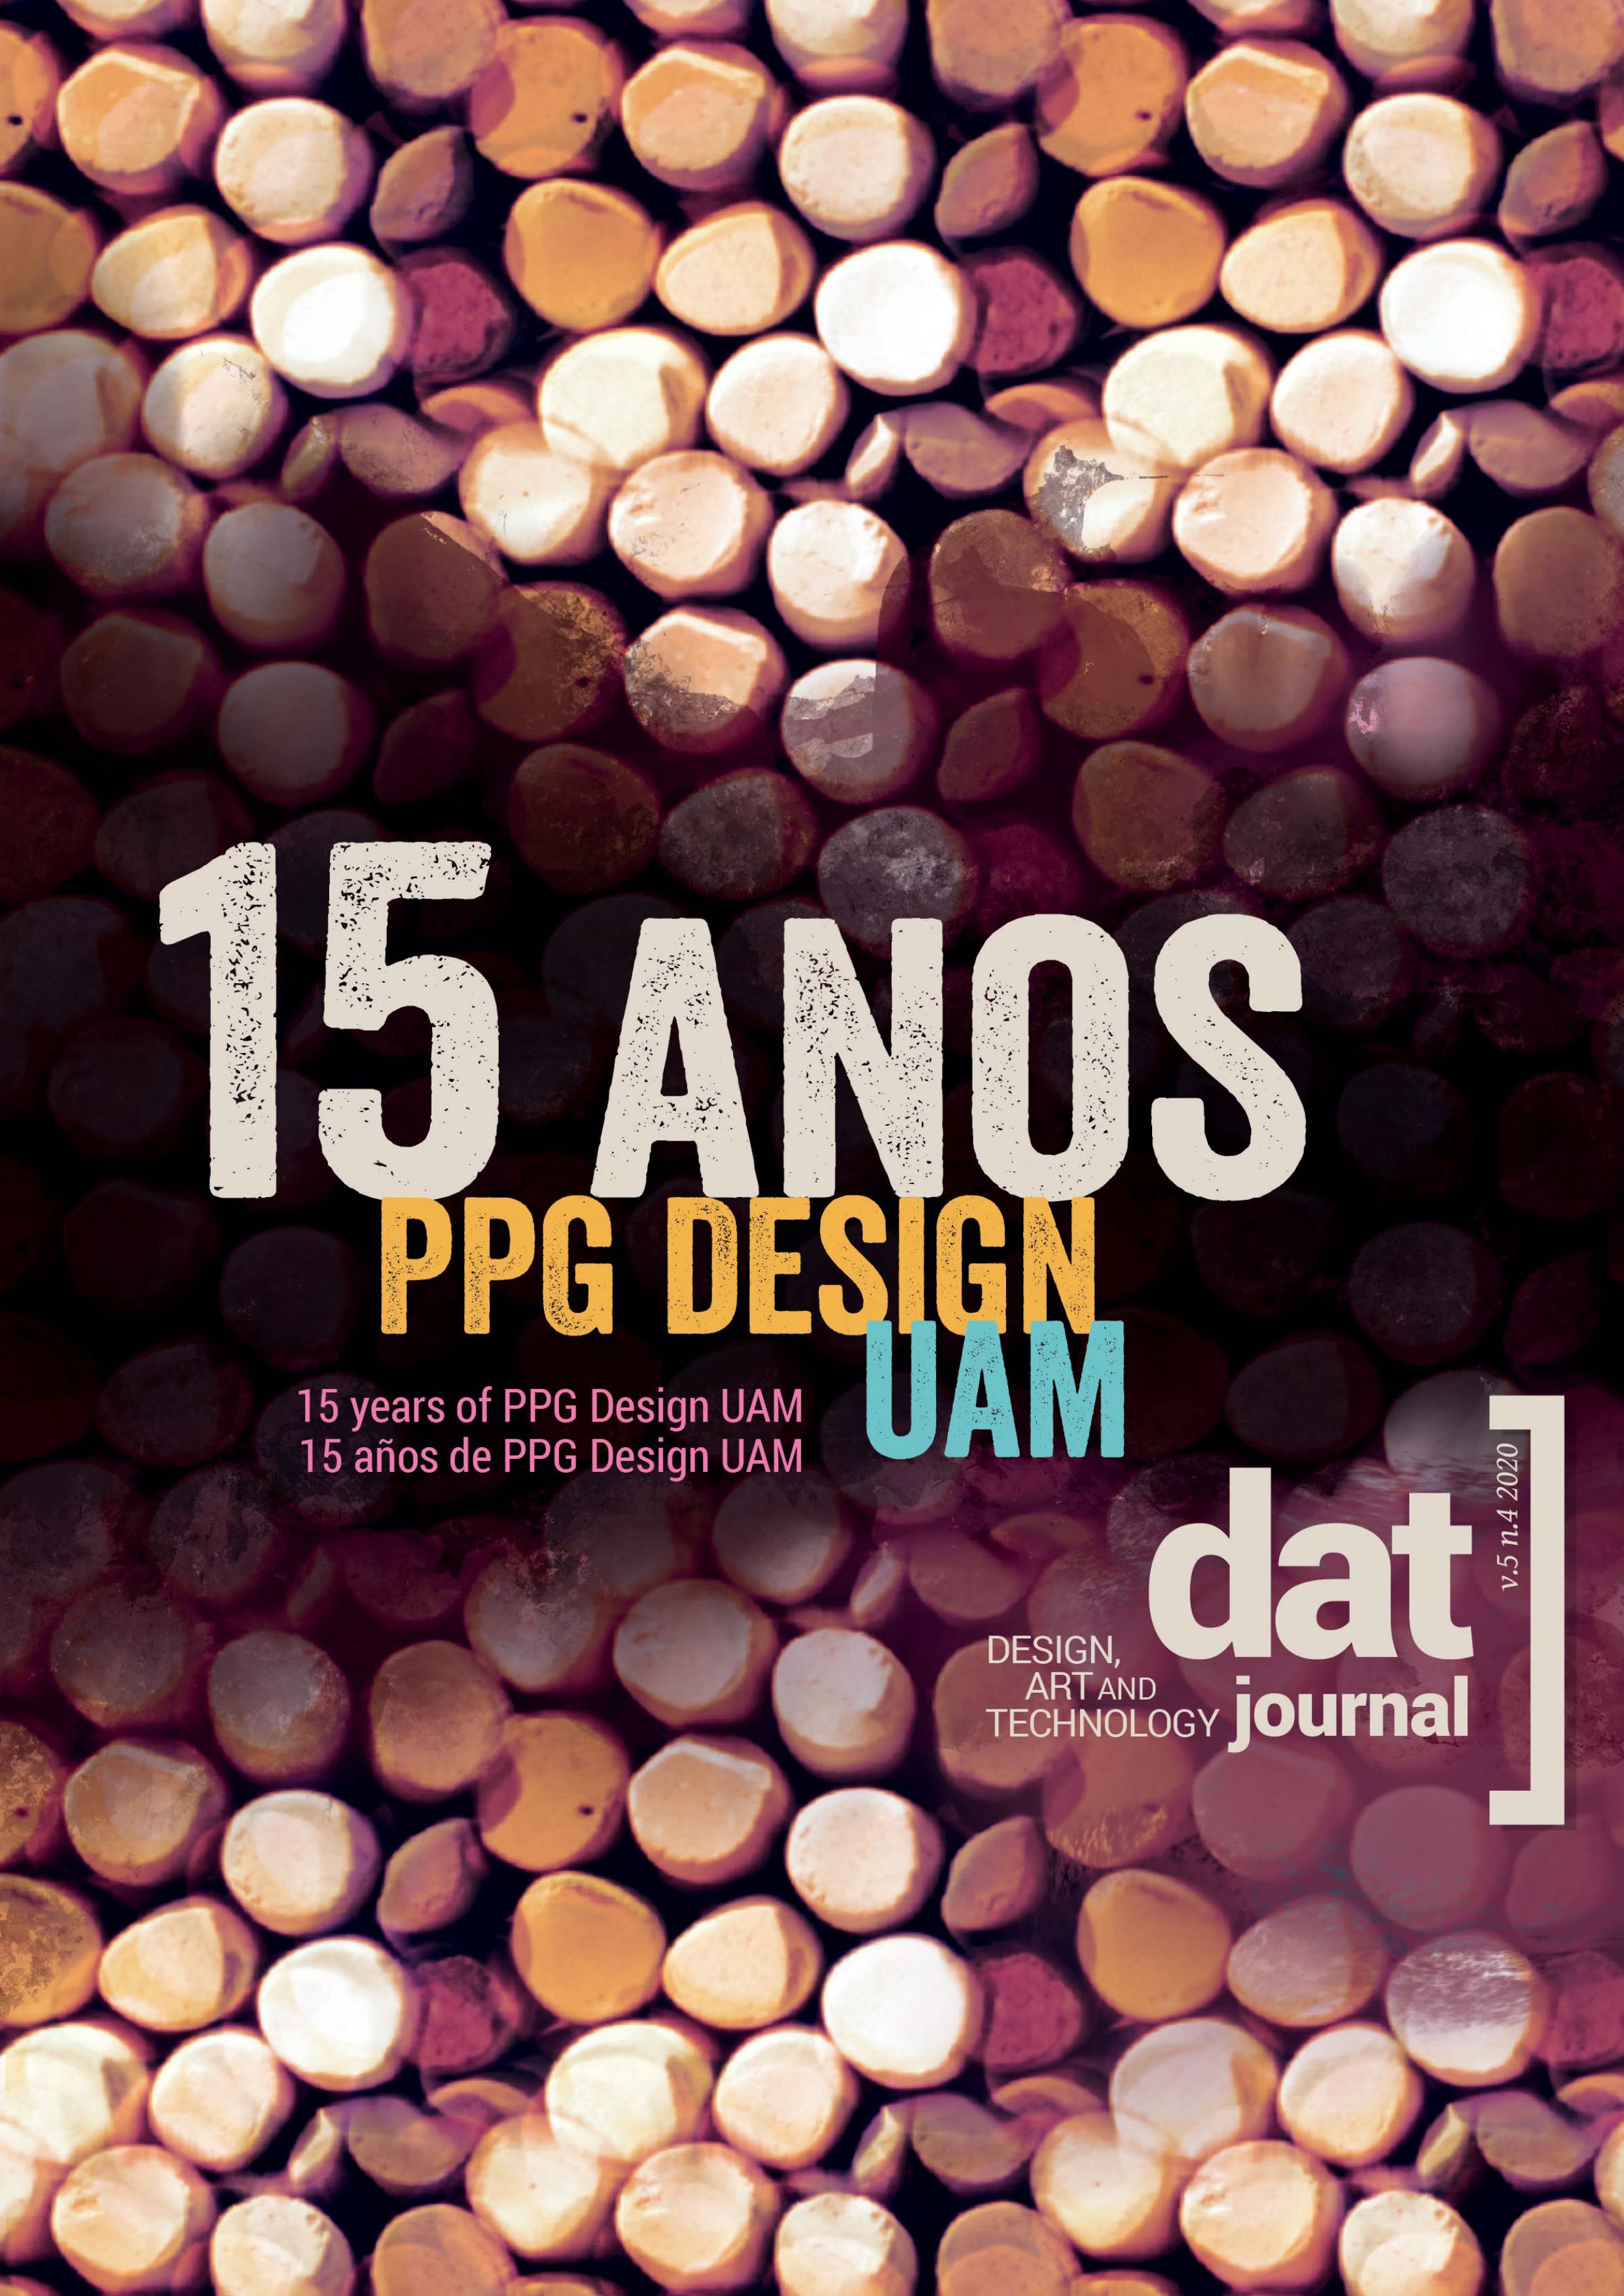 					View Vol. 5 No. 4 (2020): 15 Years of PPG Design UAM
				